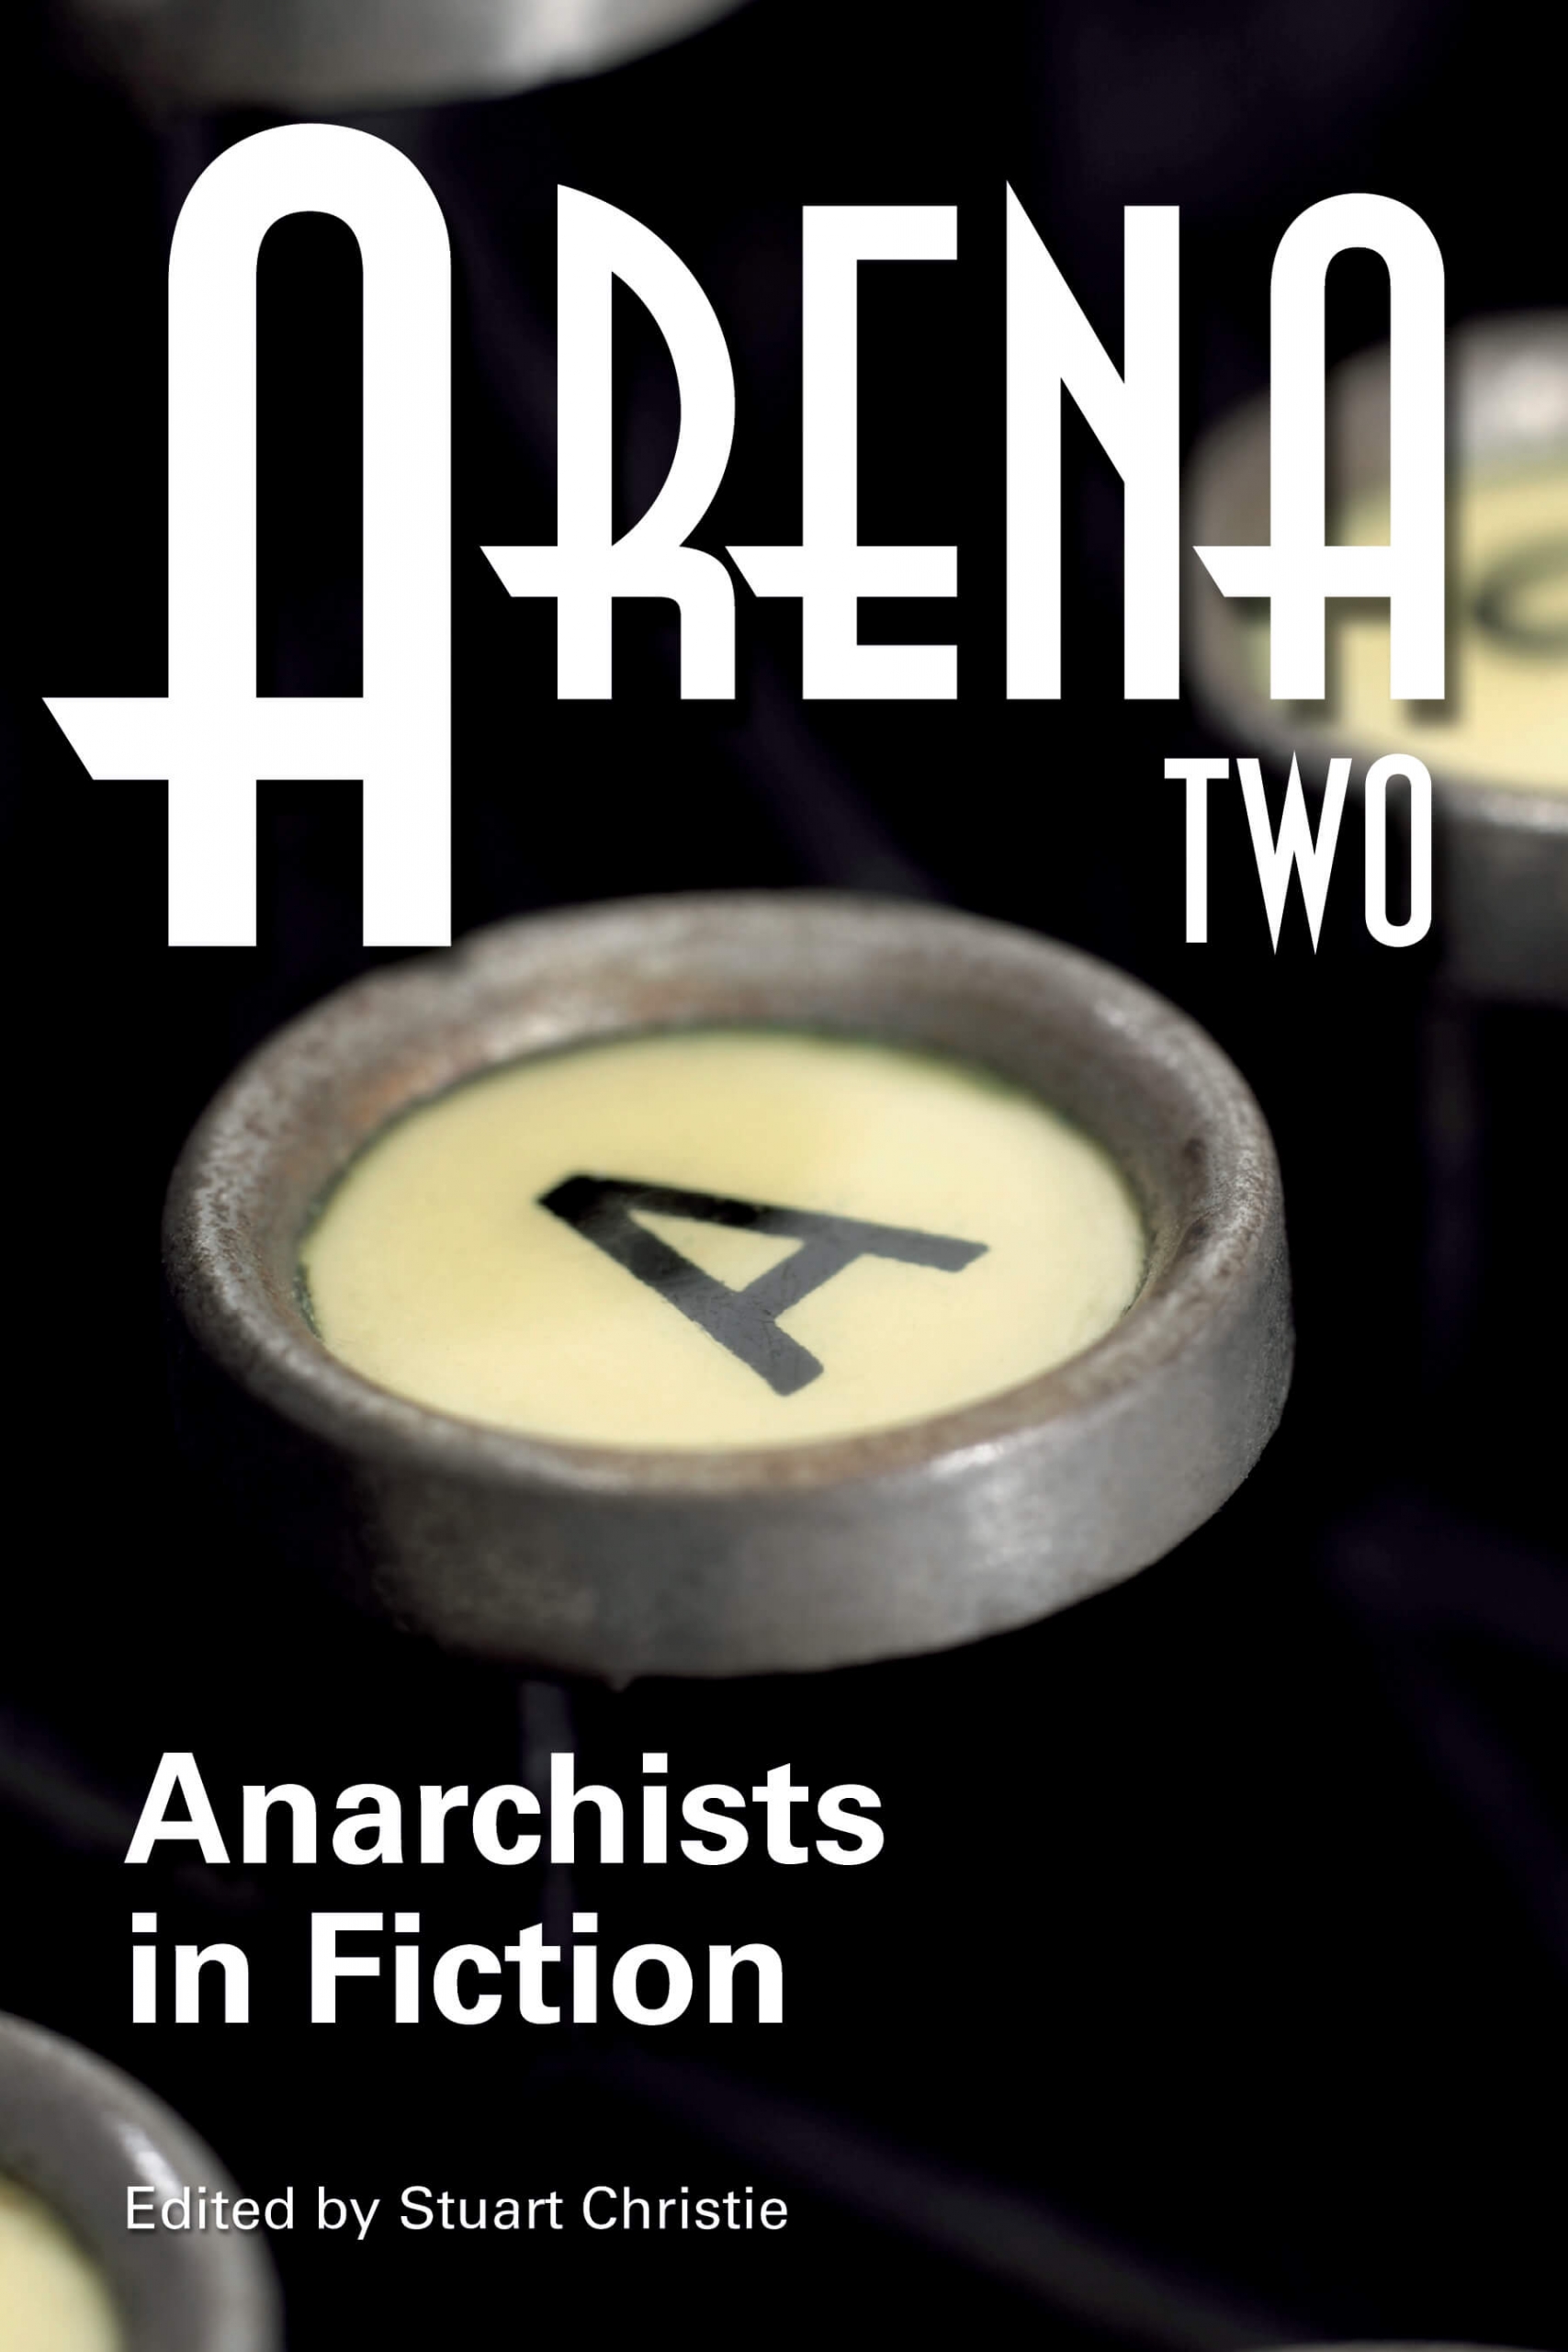 Arena Two Anarchists in Fiction PM Press UK